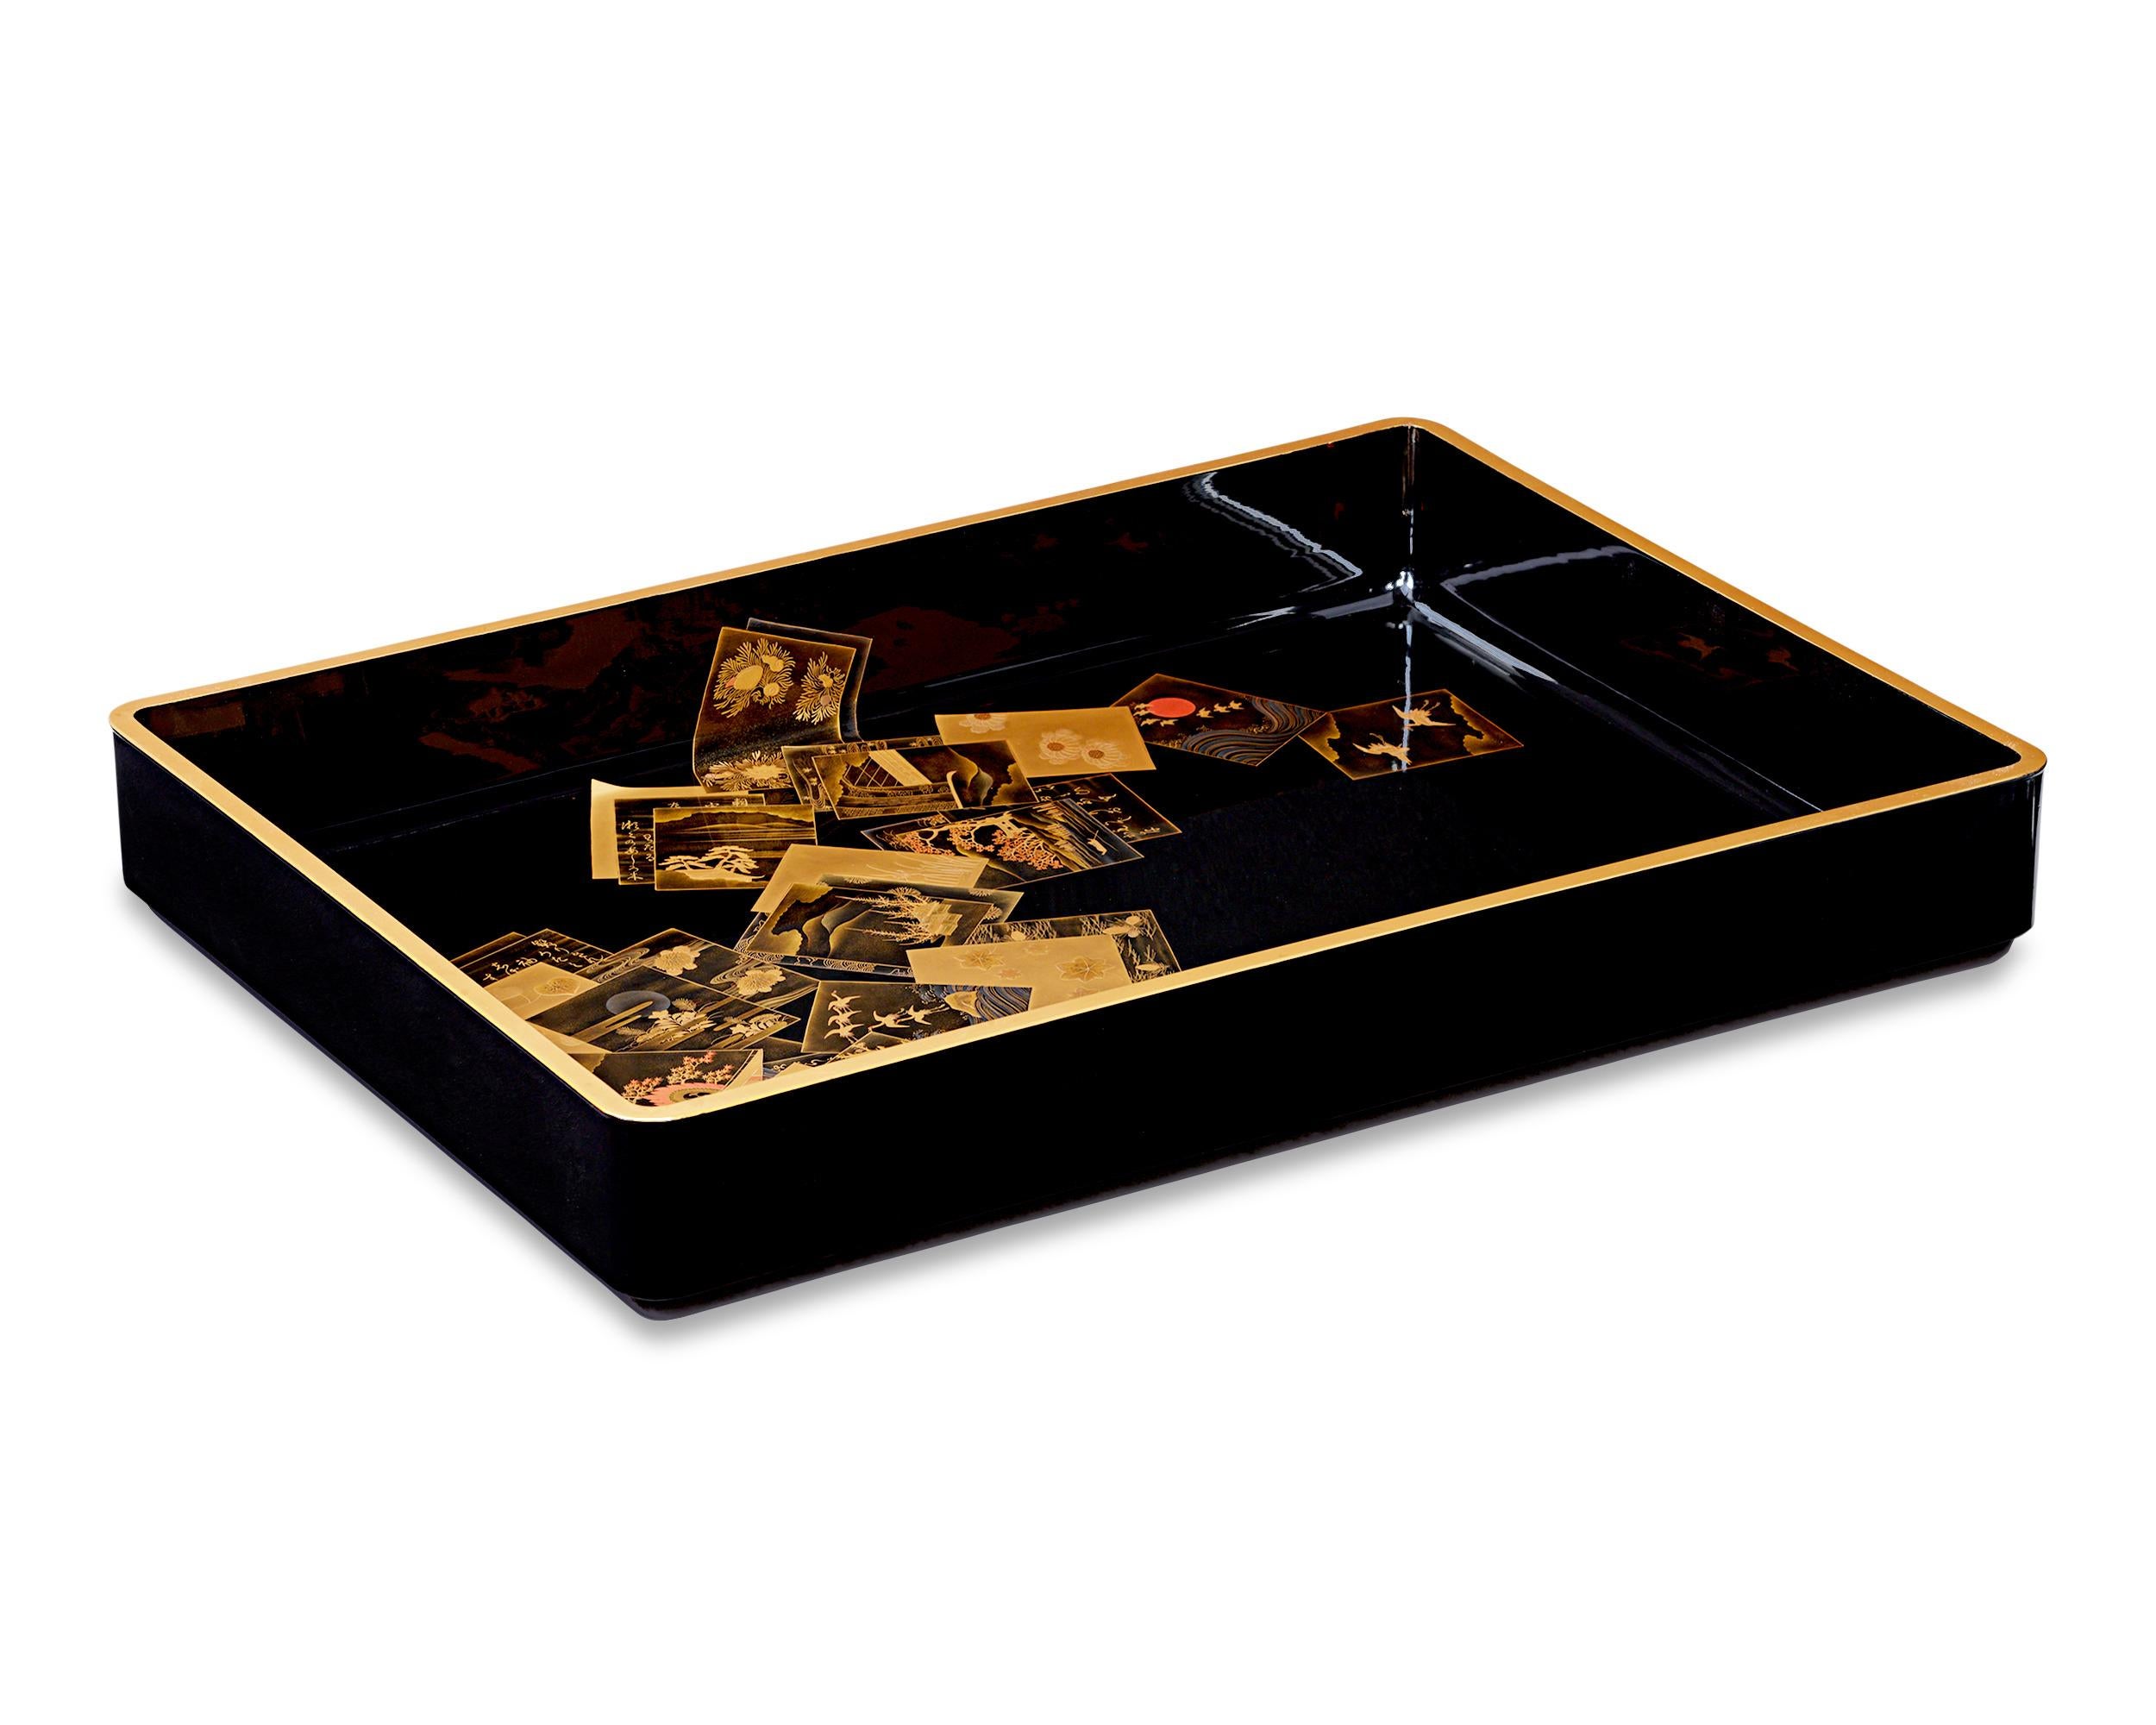 This Meiji-period lacquer tray represents the mastery of Japanese craftsmen in the art of lacquer work. Precious materials are precisely inlaid in the lacquer base, creating a highly illusionistic three-dimensional effect. Gold lacquer borders the